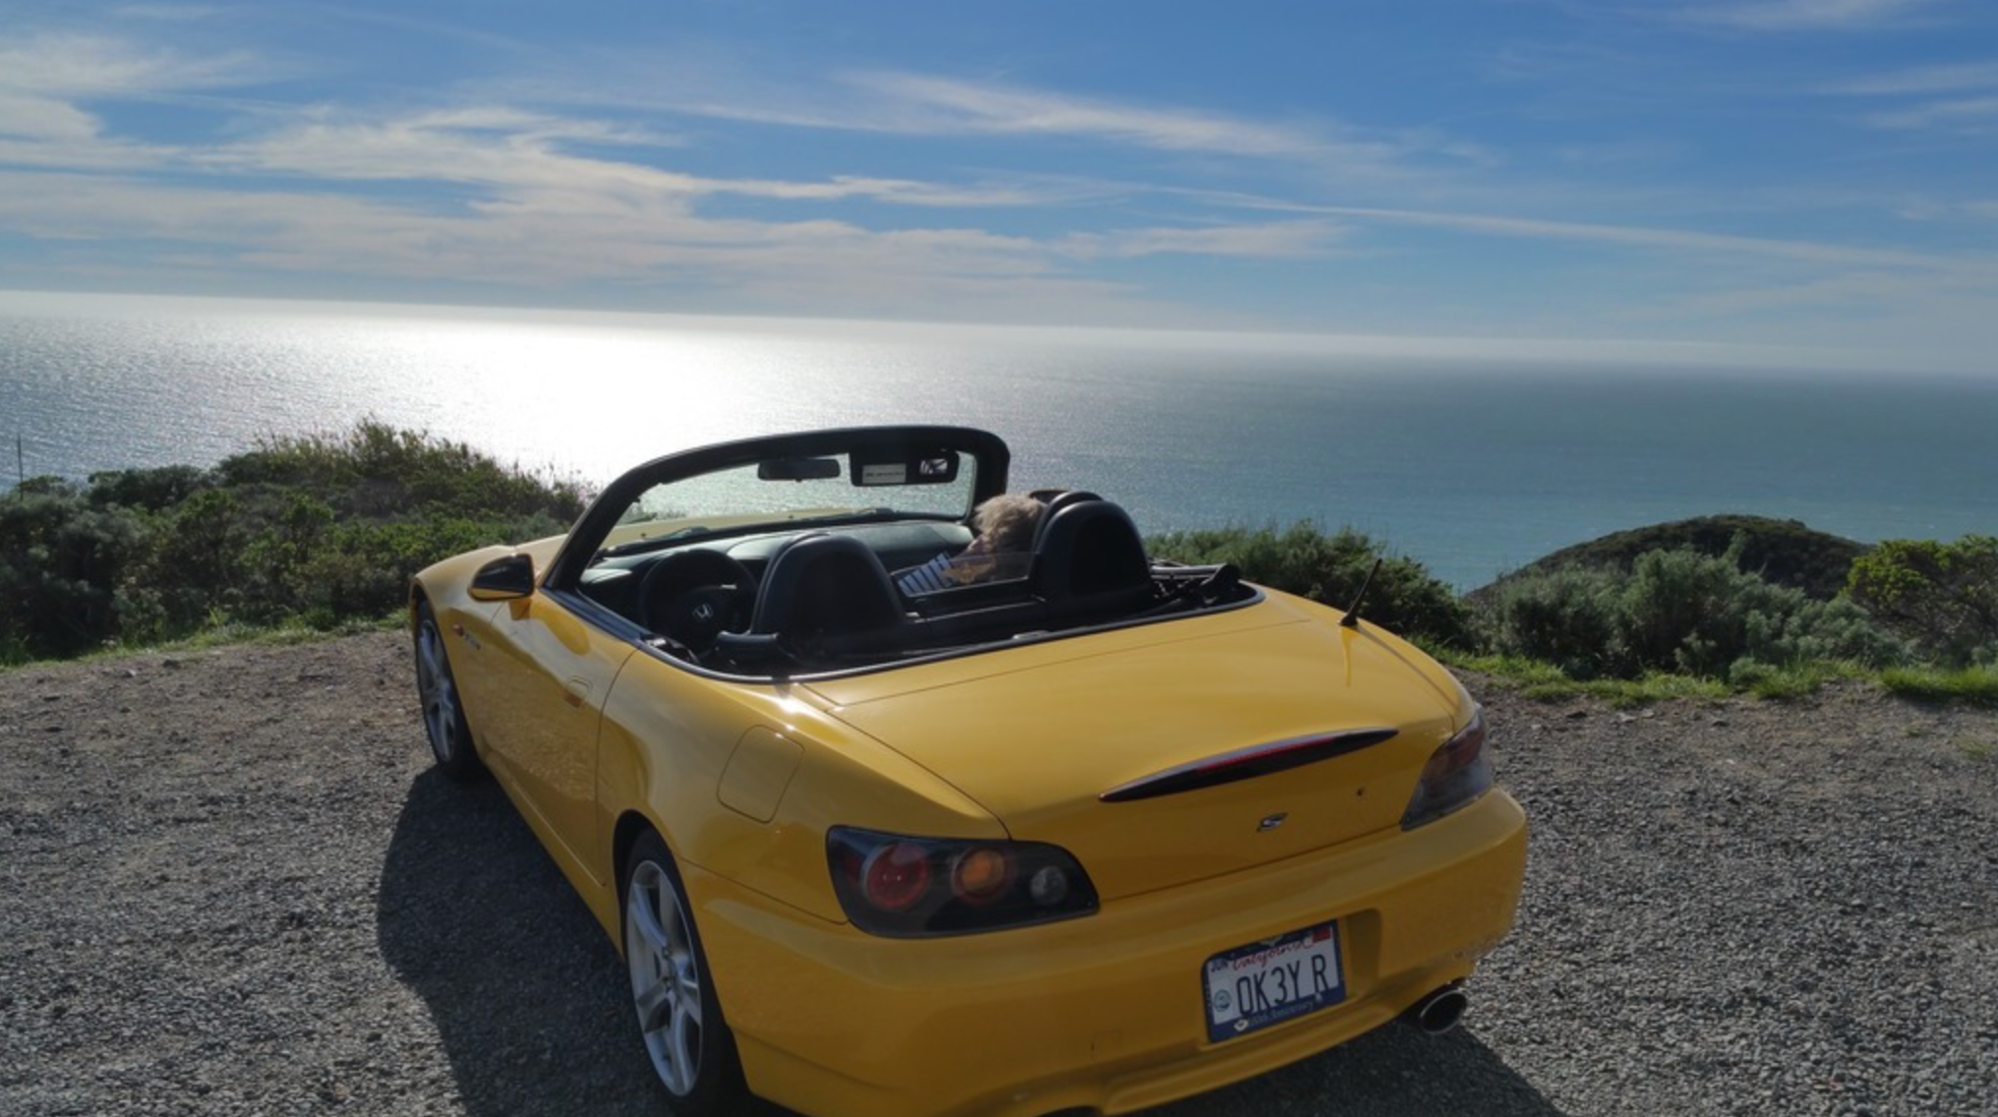 Mint-Condition Honda S2000 Has Only Gone 1,000 Miles